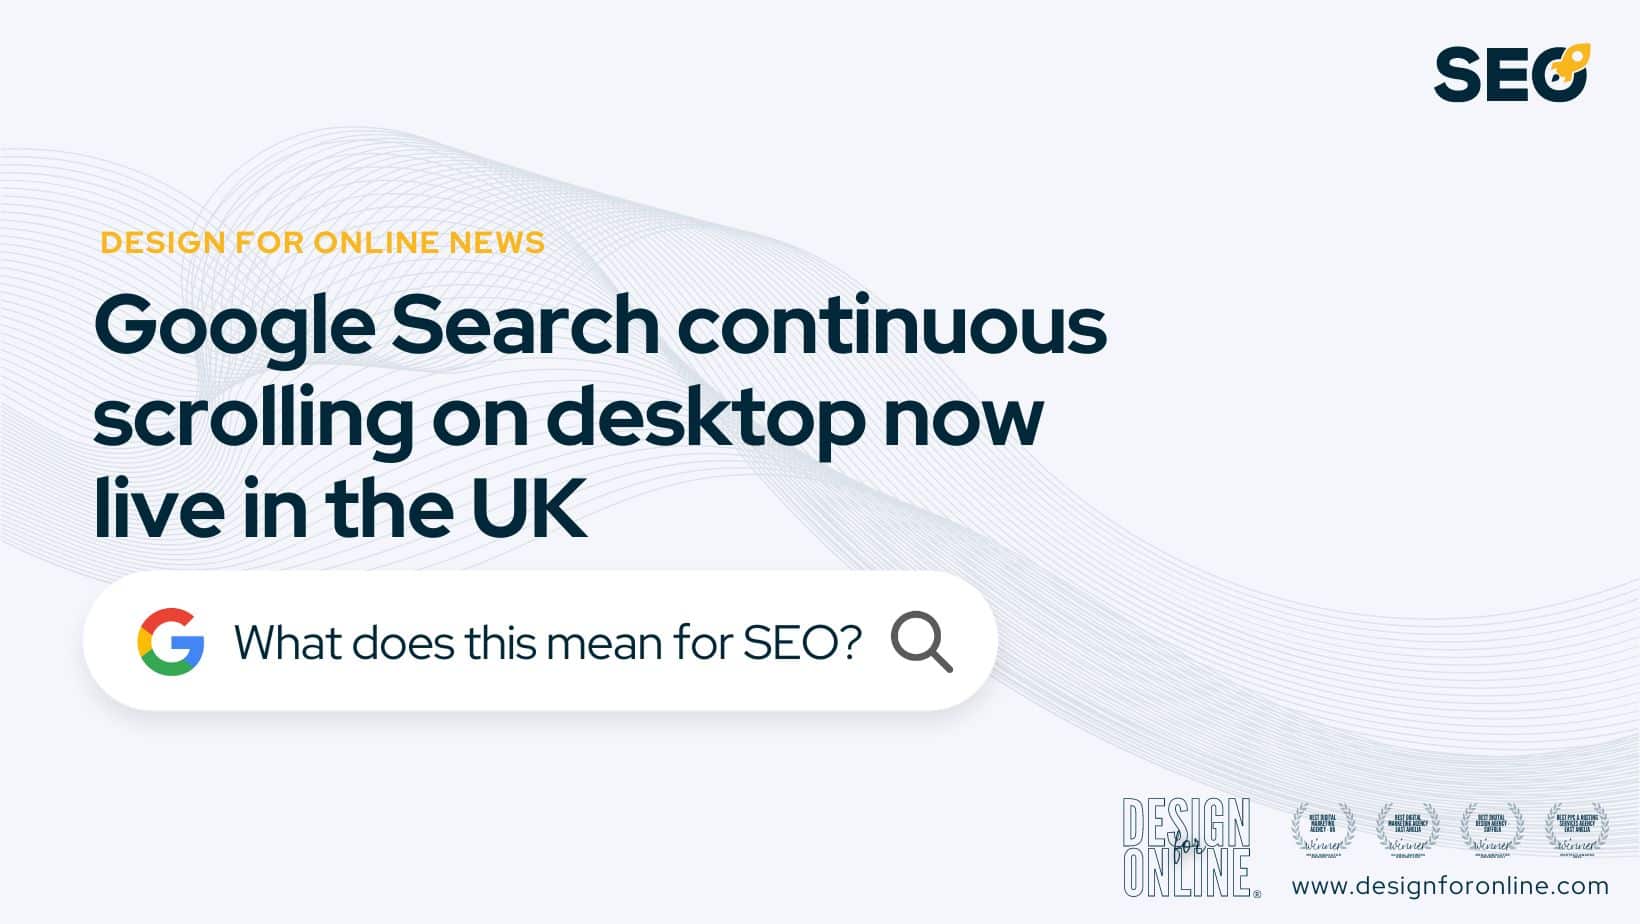 Google Search continuous on desktop for Search infinite scrolling on desktop now live in the UK